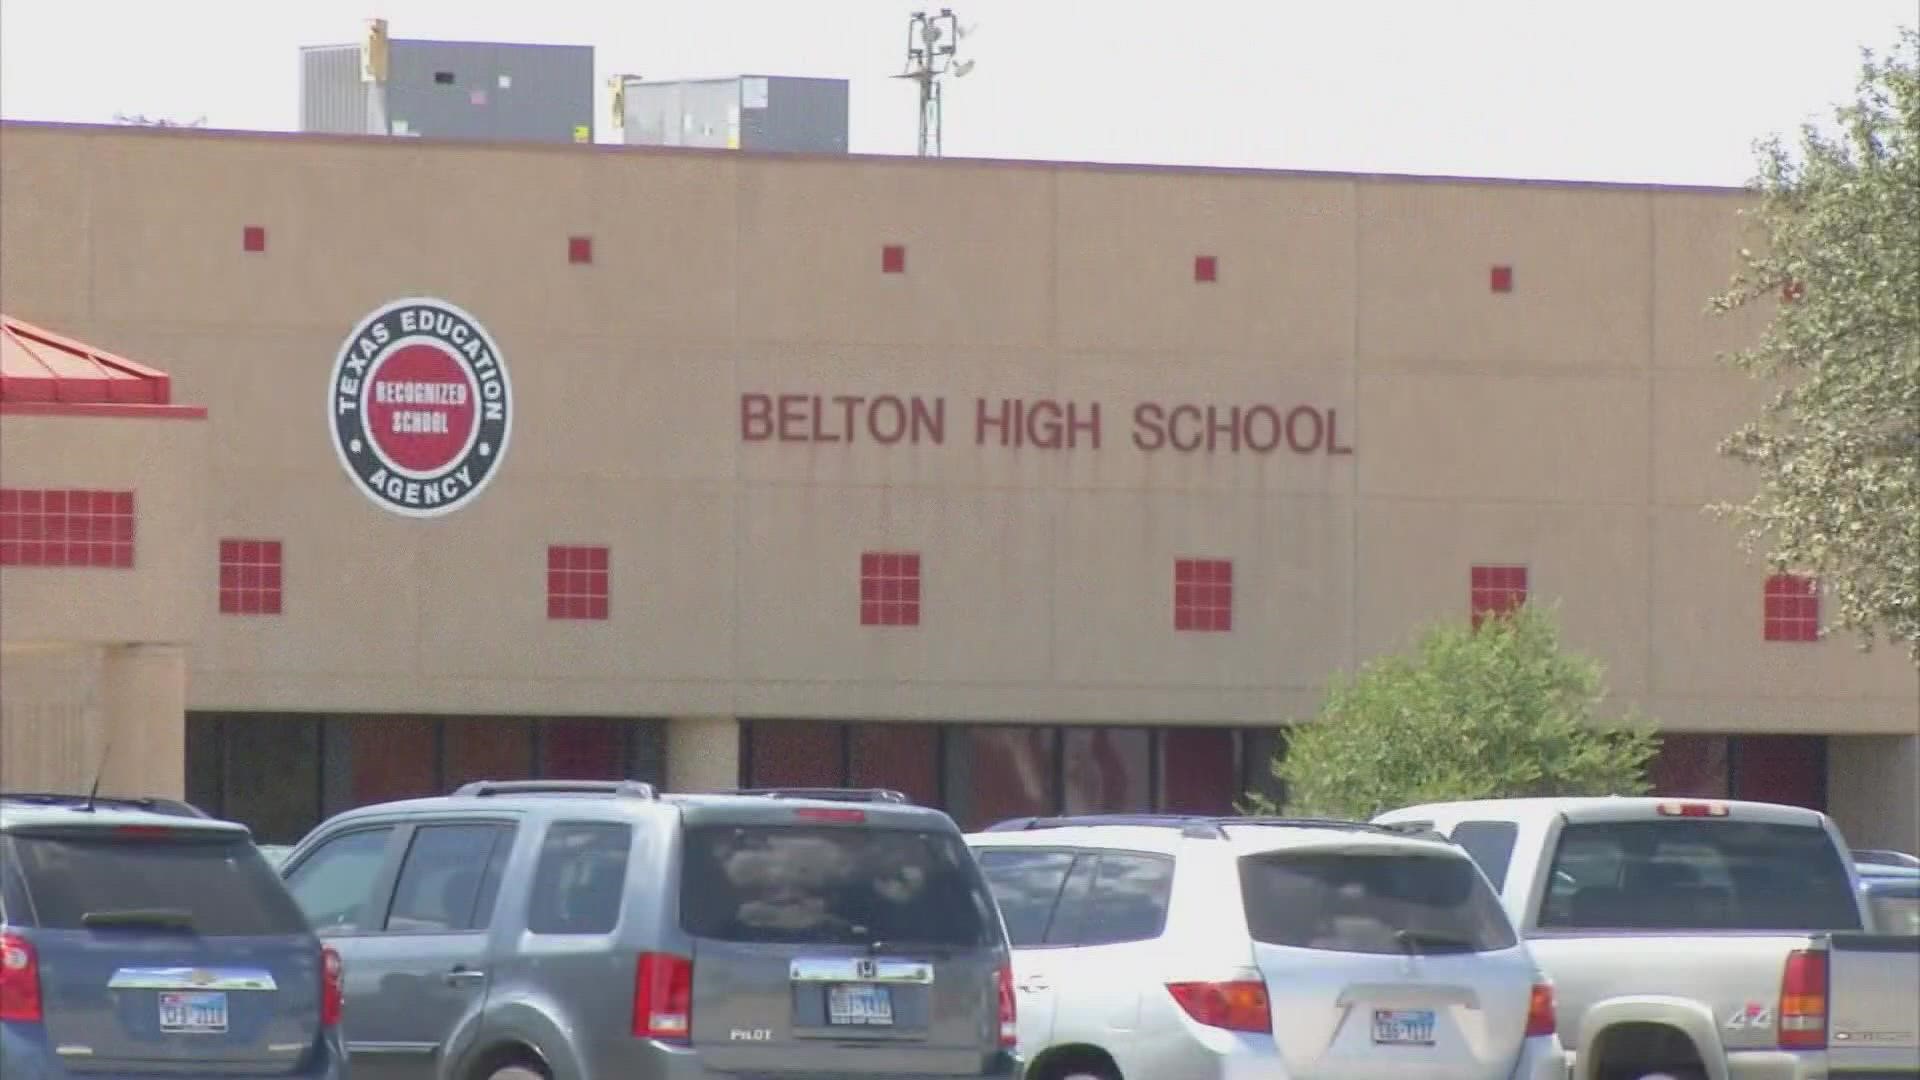 The school district is implementing safety and mental health measures to help students.